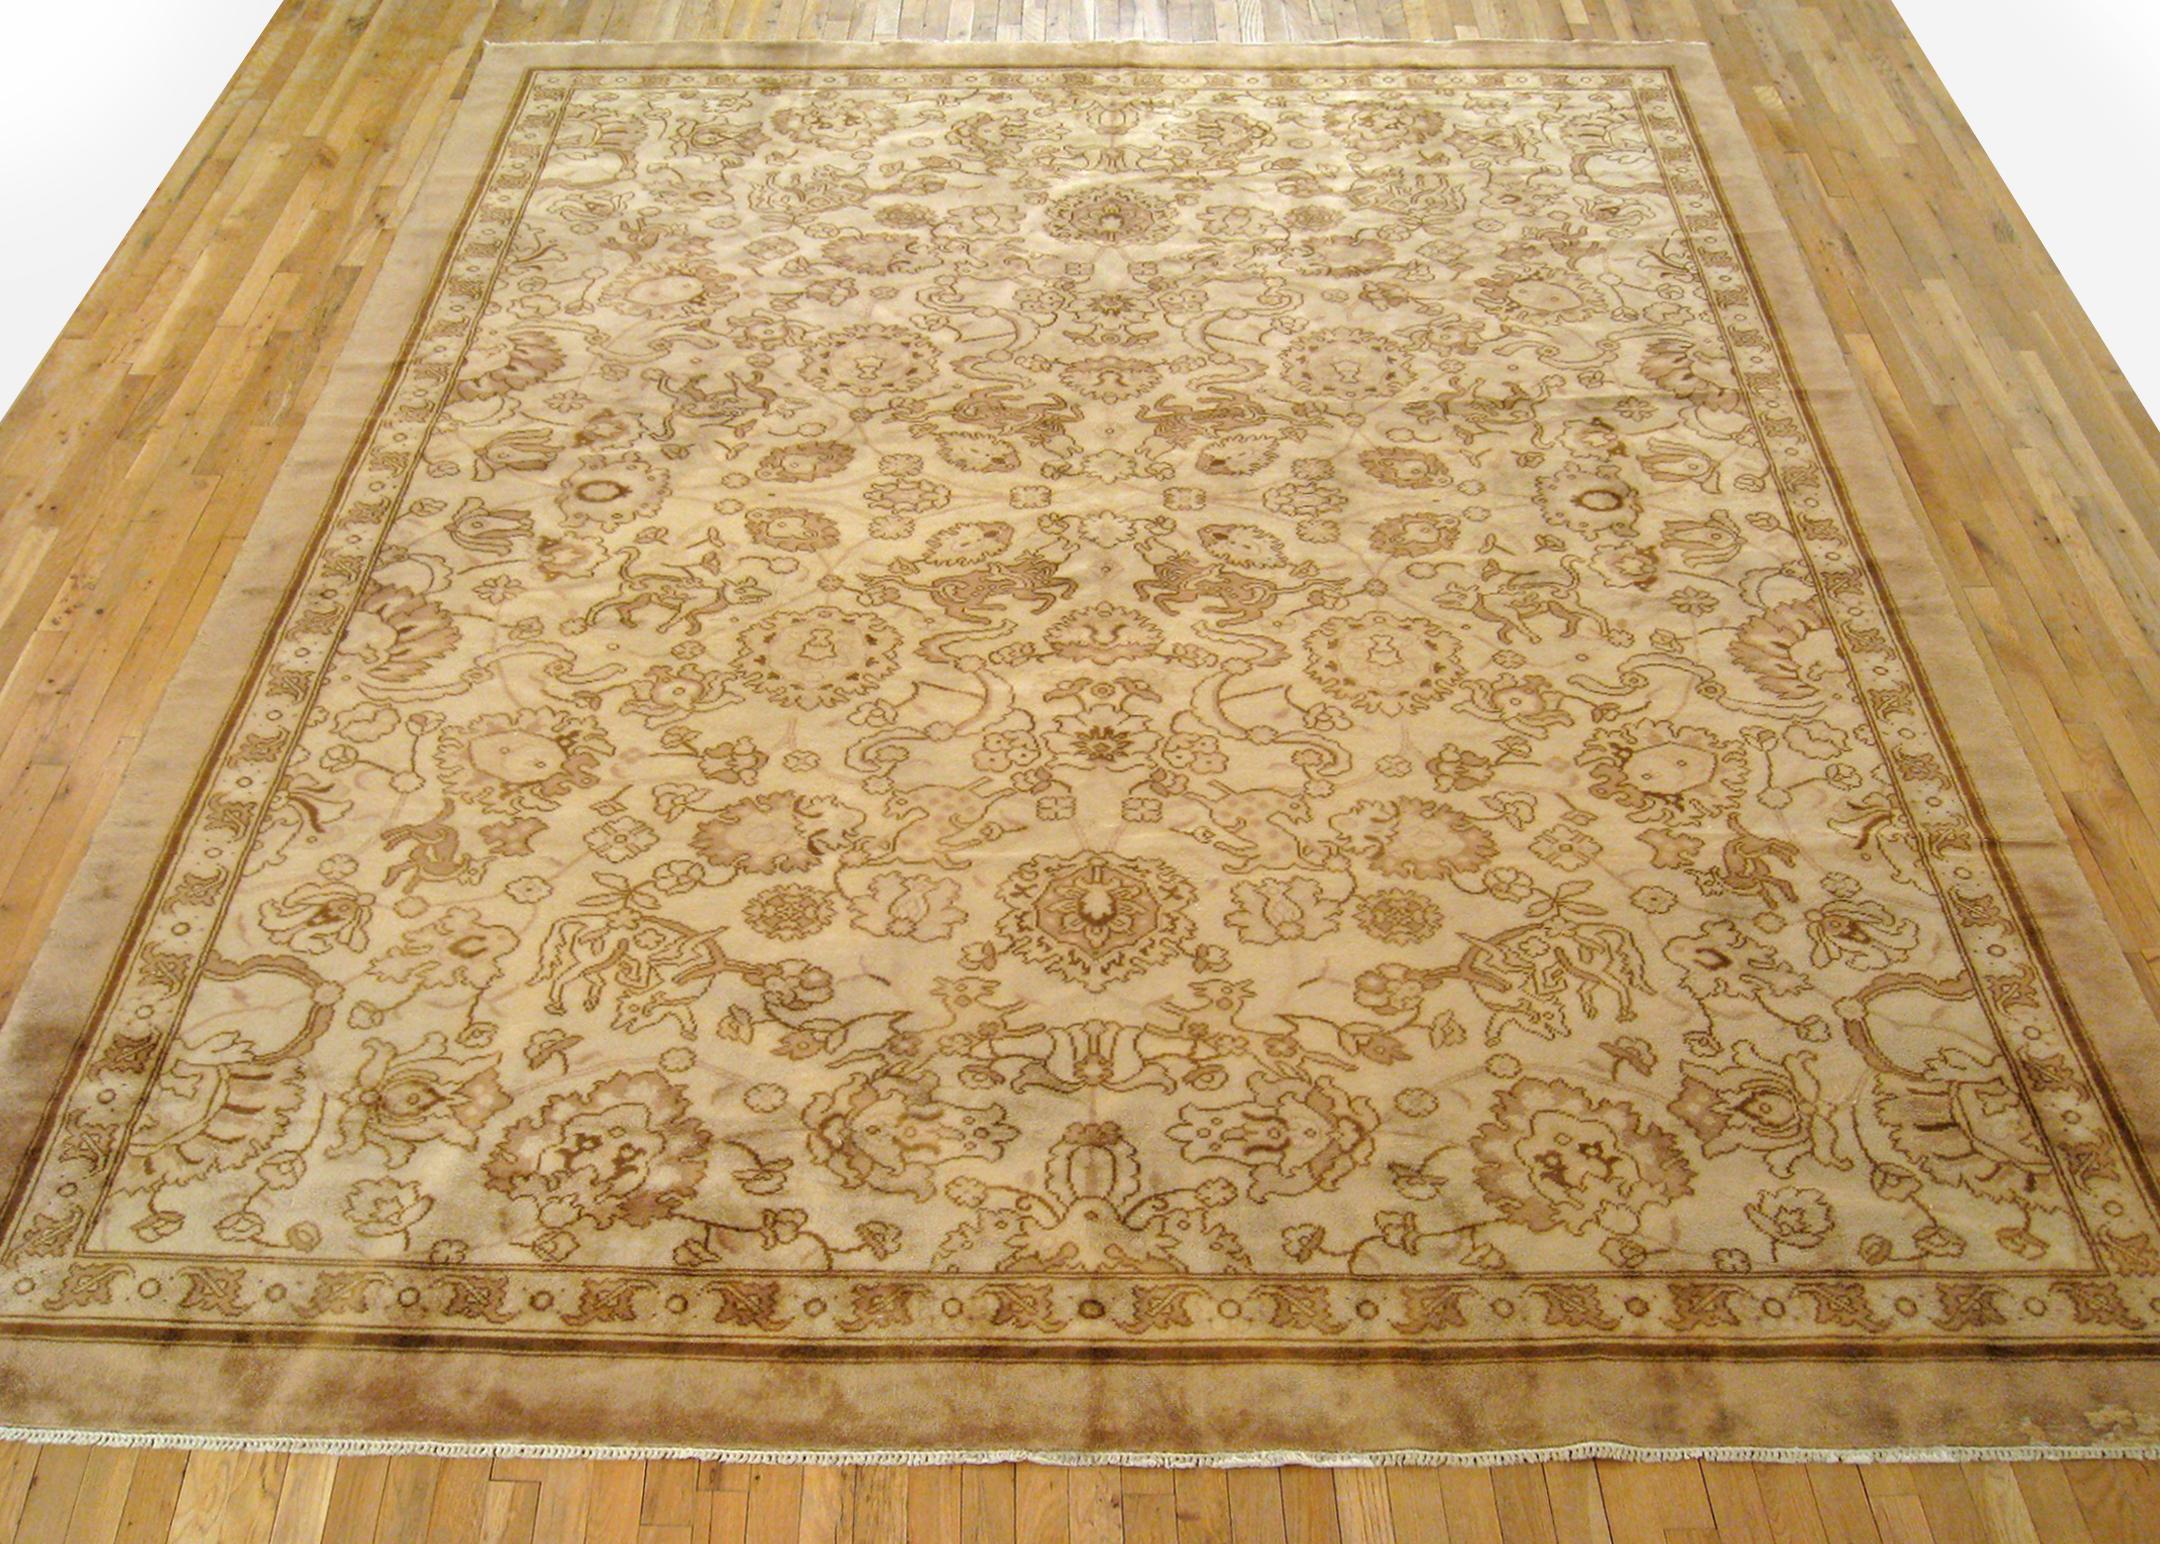 Antique European Savonnerie Rug, Room size, circa 1930

A one-of-a-kind antique European Savonnerie Oriental Carpet, hand-knotted with short wool pile. This beautiful rug features palmettes allover the beige primary field, with beige outer border.